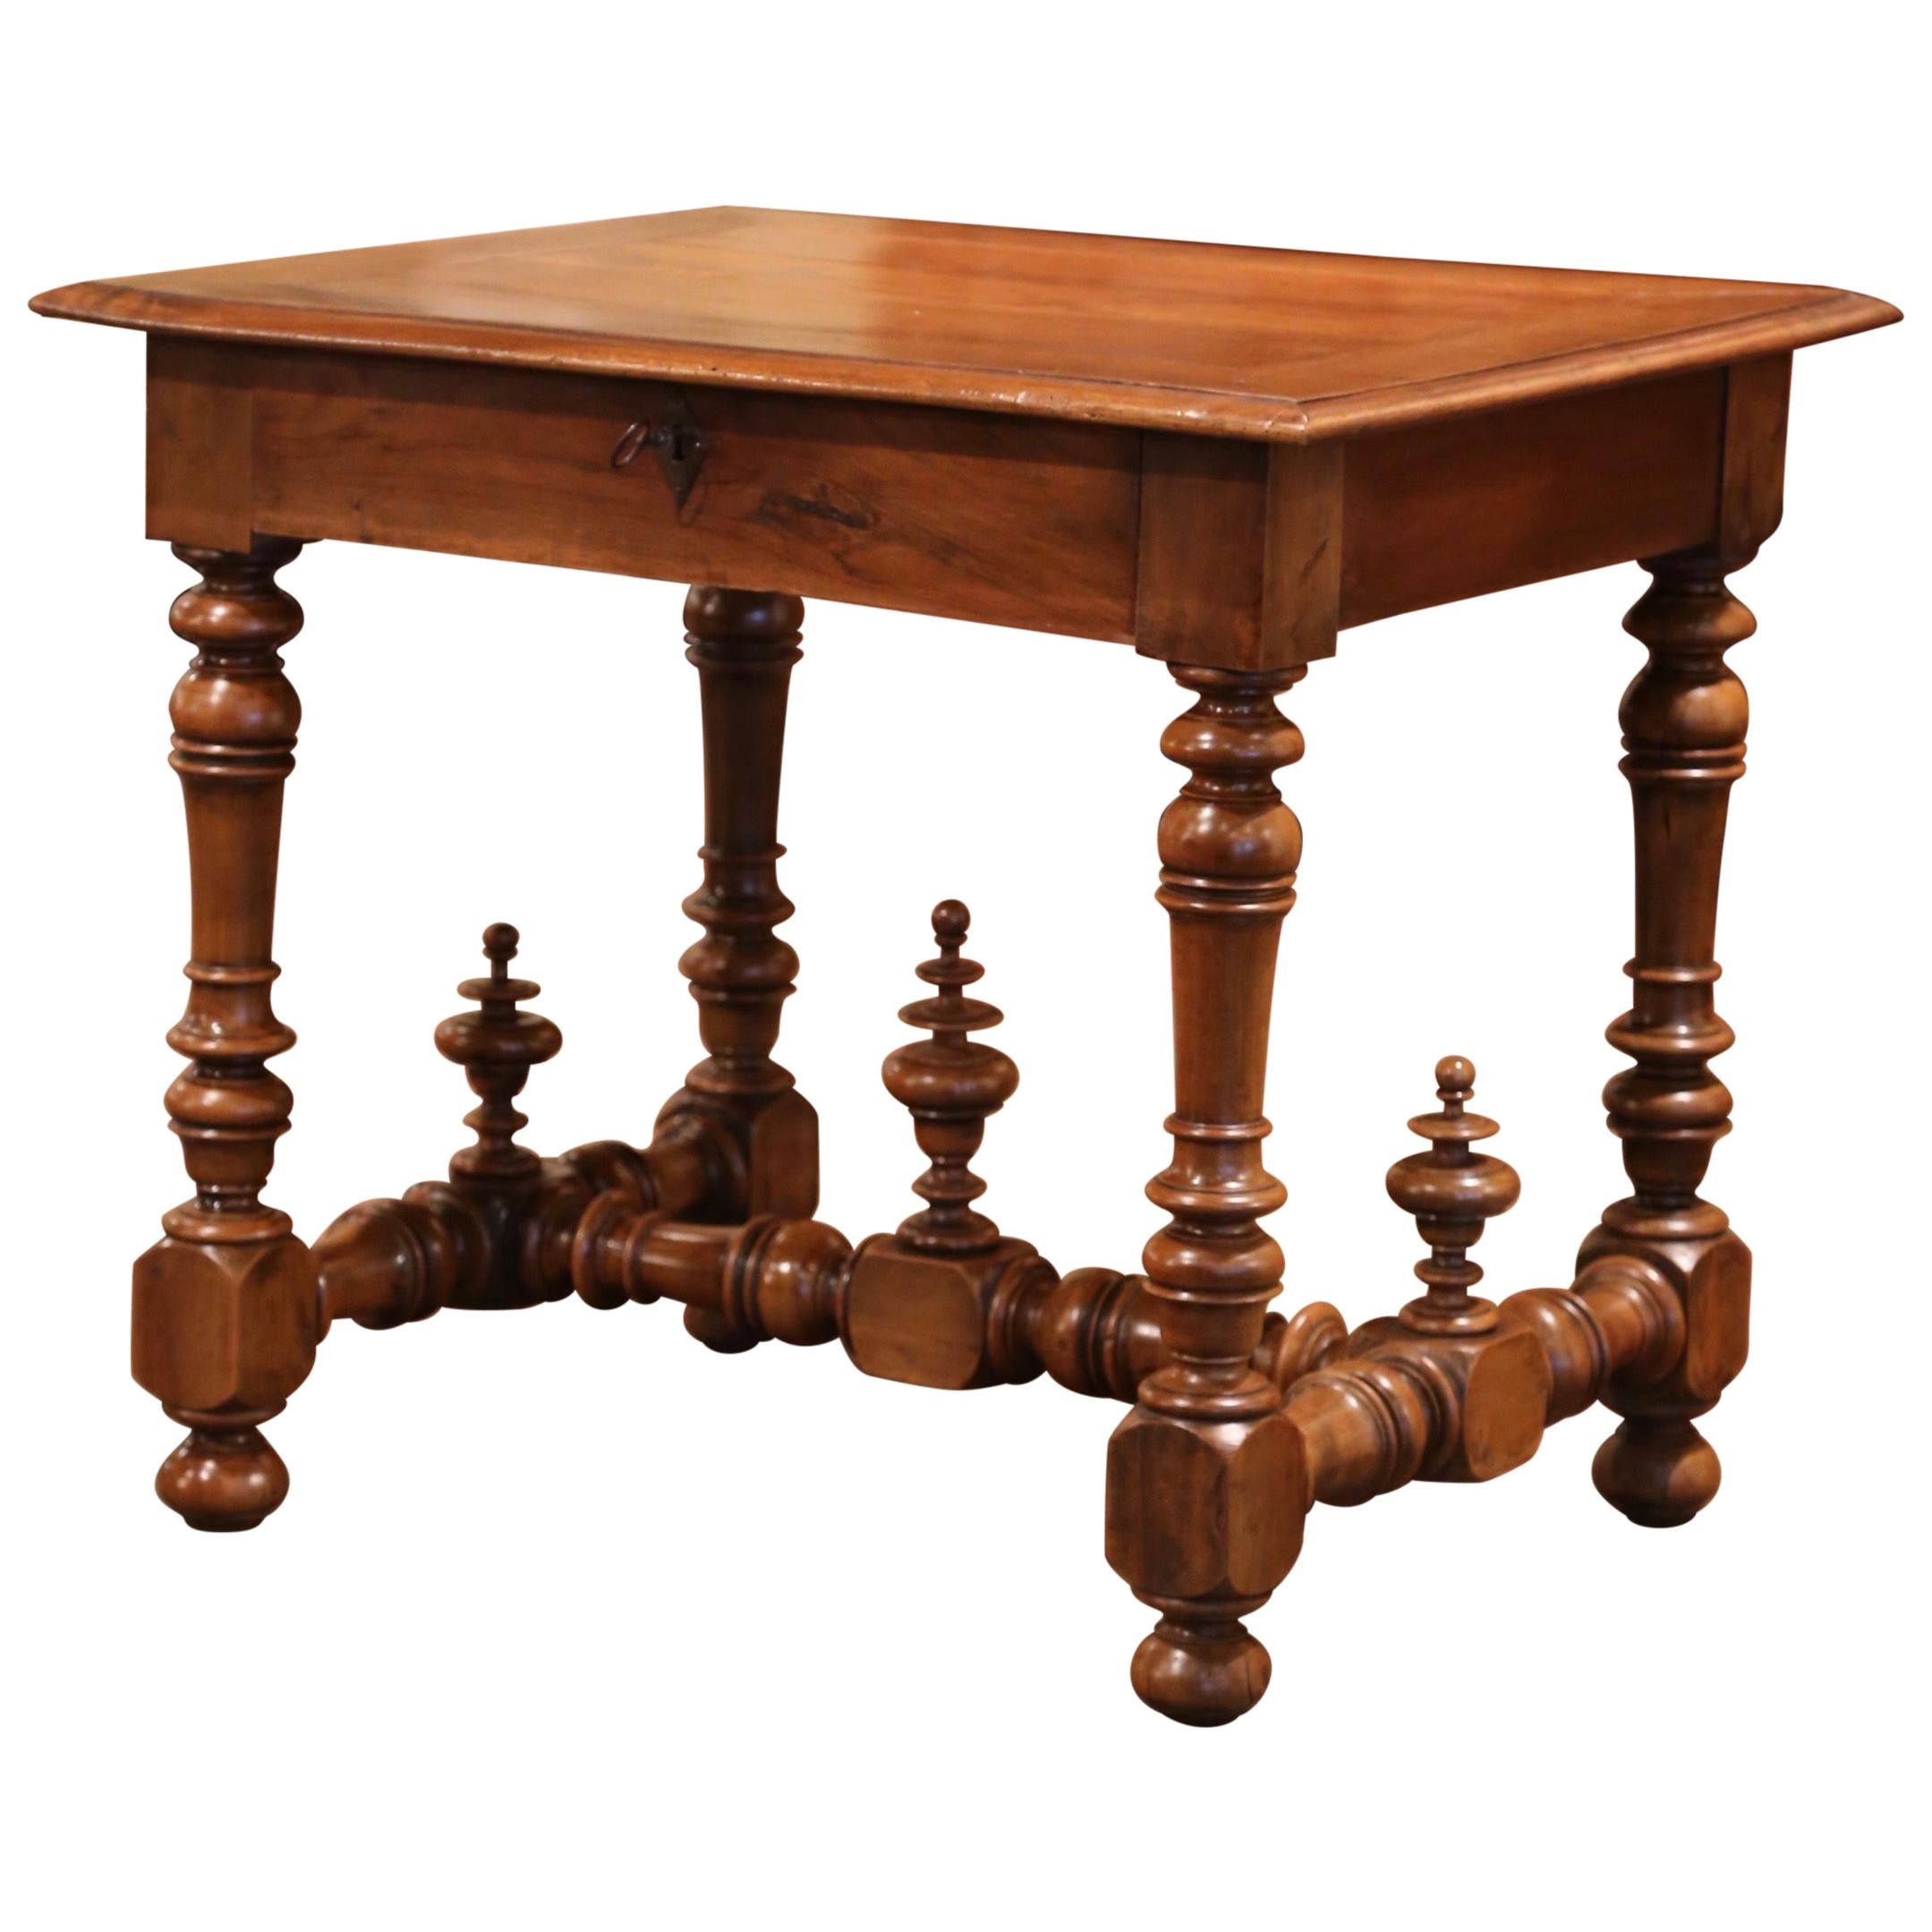 19th Century Louis XIII Carved Walnut and Pear Table with Decorative Finials